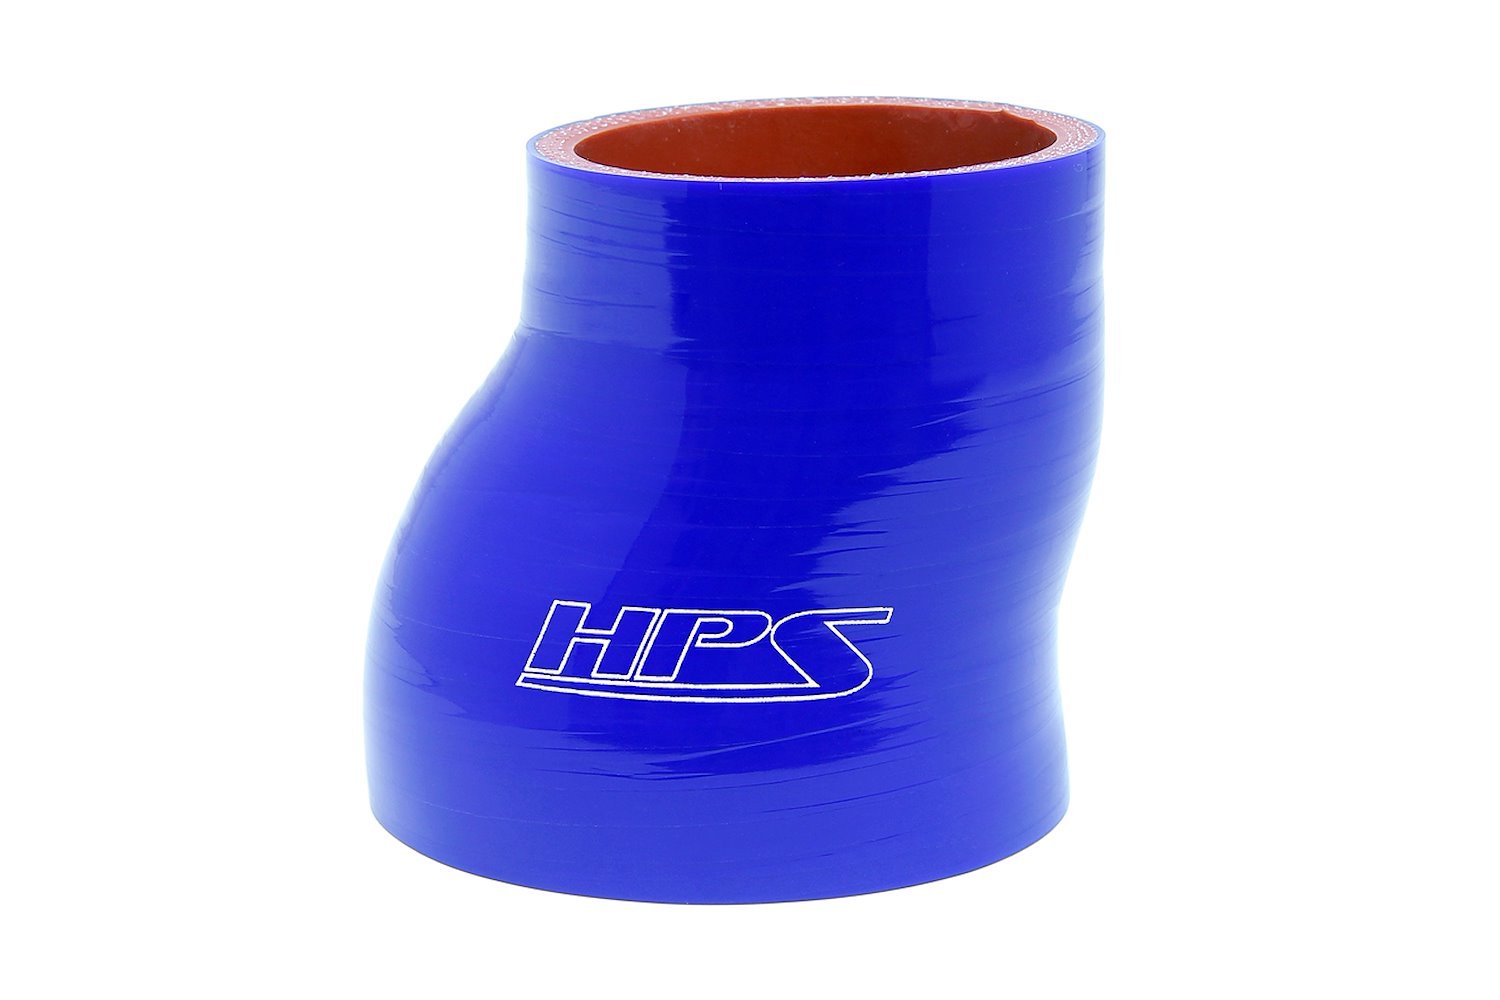 HTSOR-375-400-L4-BLUE Silicone Offset Reducer Hose, High-Temp Reinforced, 3-3/4 in. - 4 in. ID, 4 in. Long, Blue